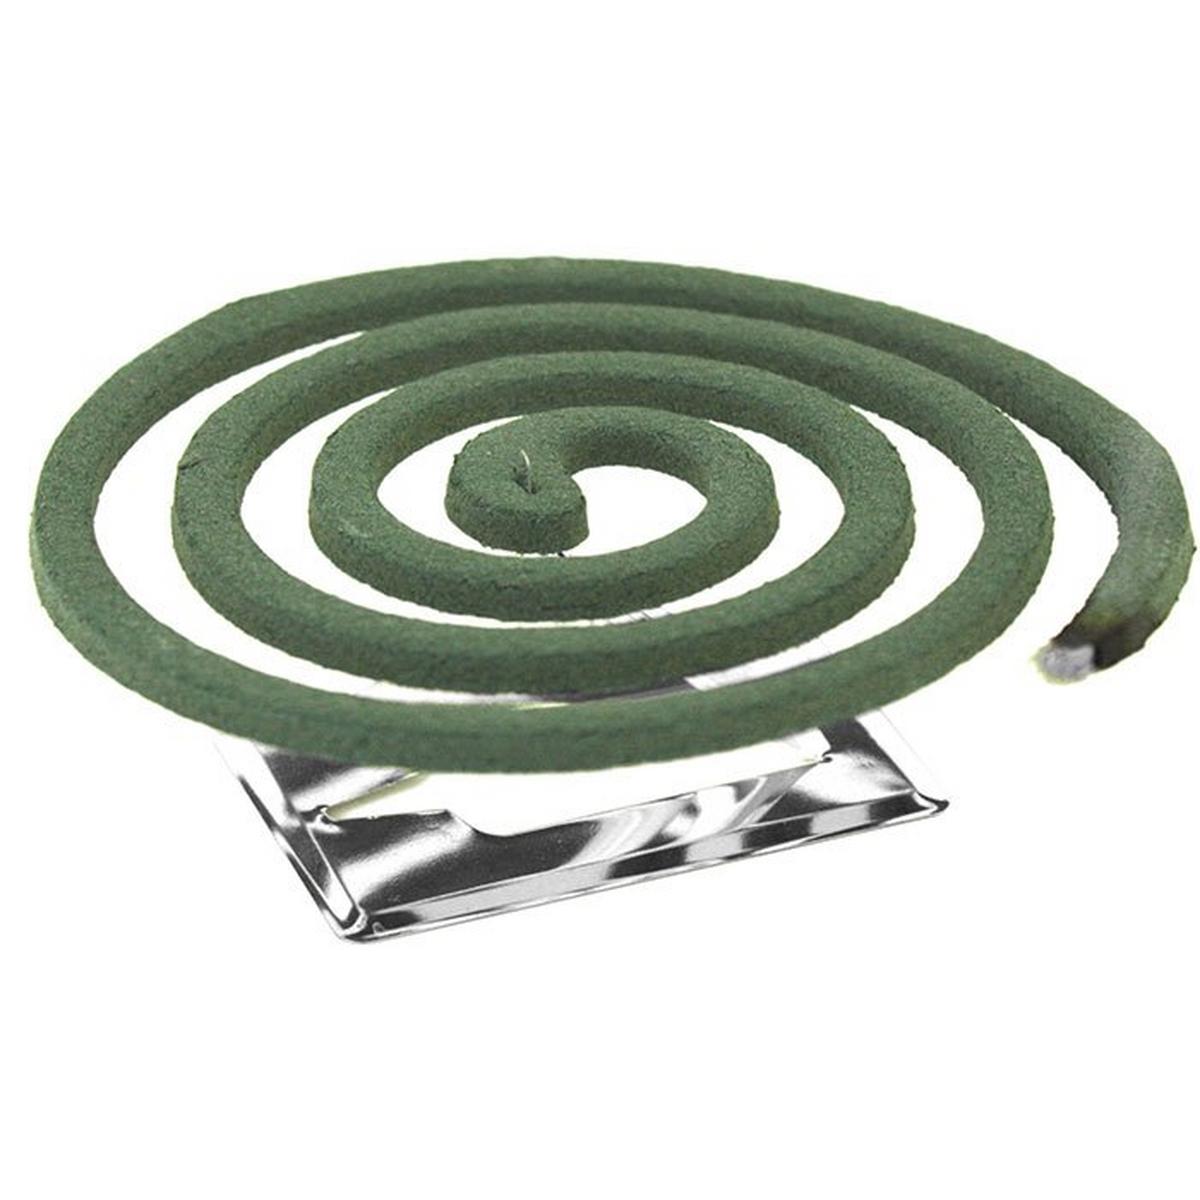 Mosquito Coil (10 Pack)